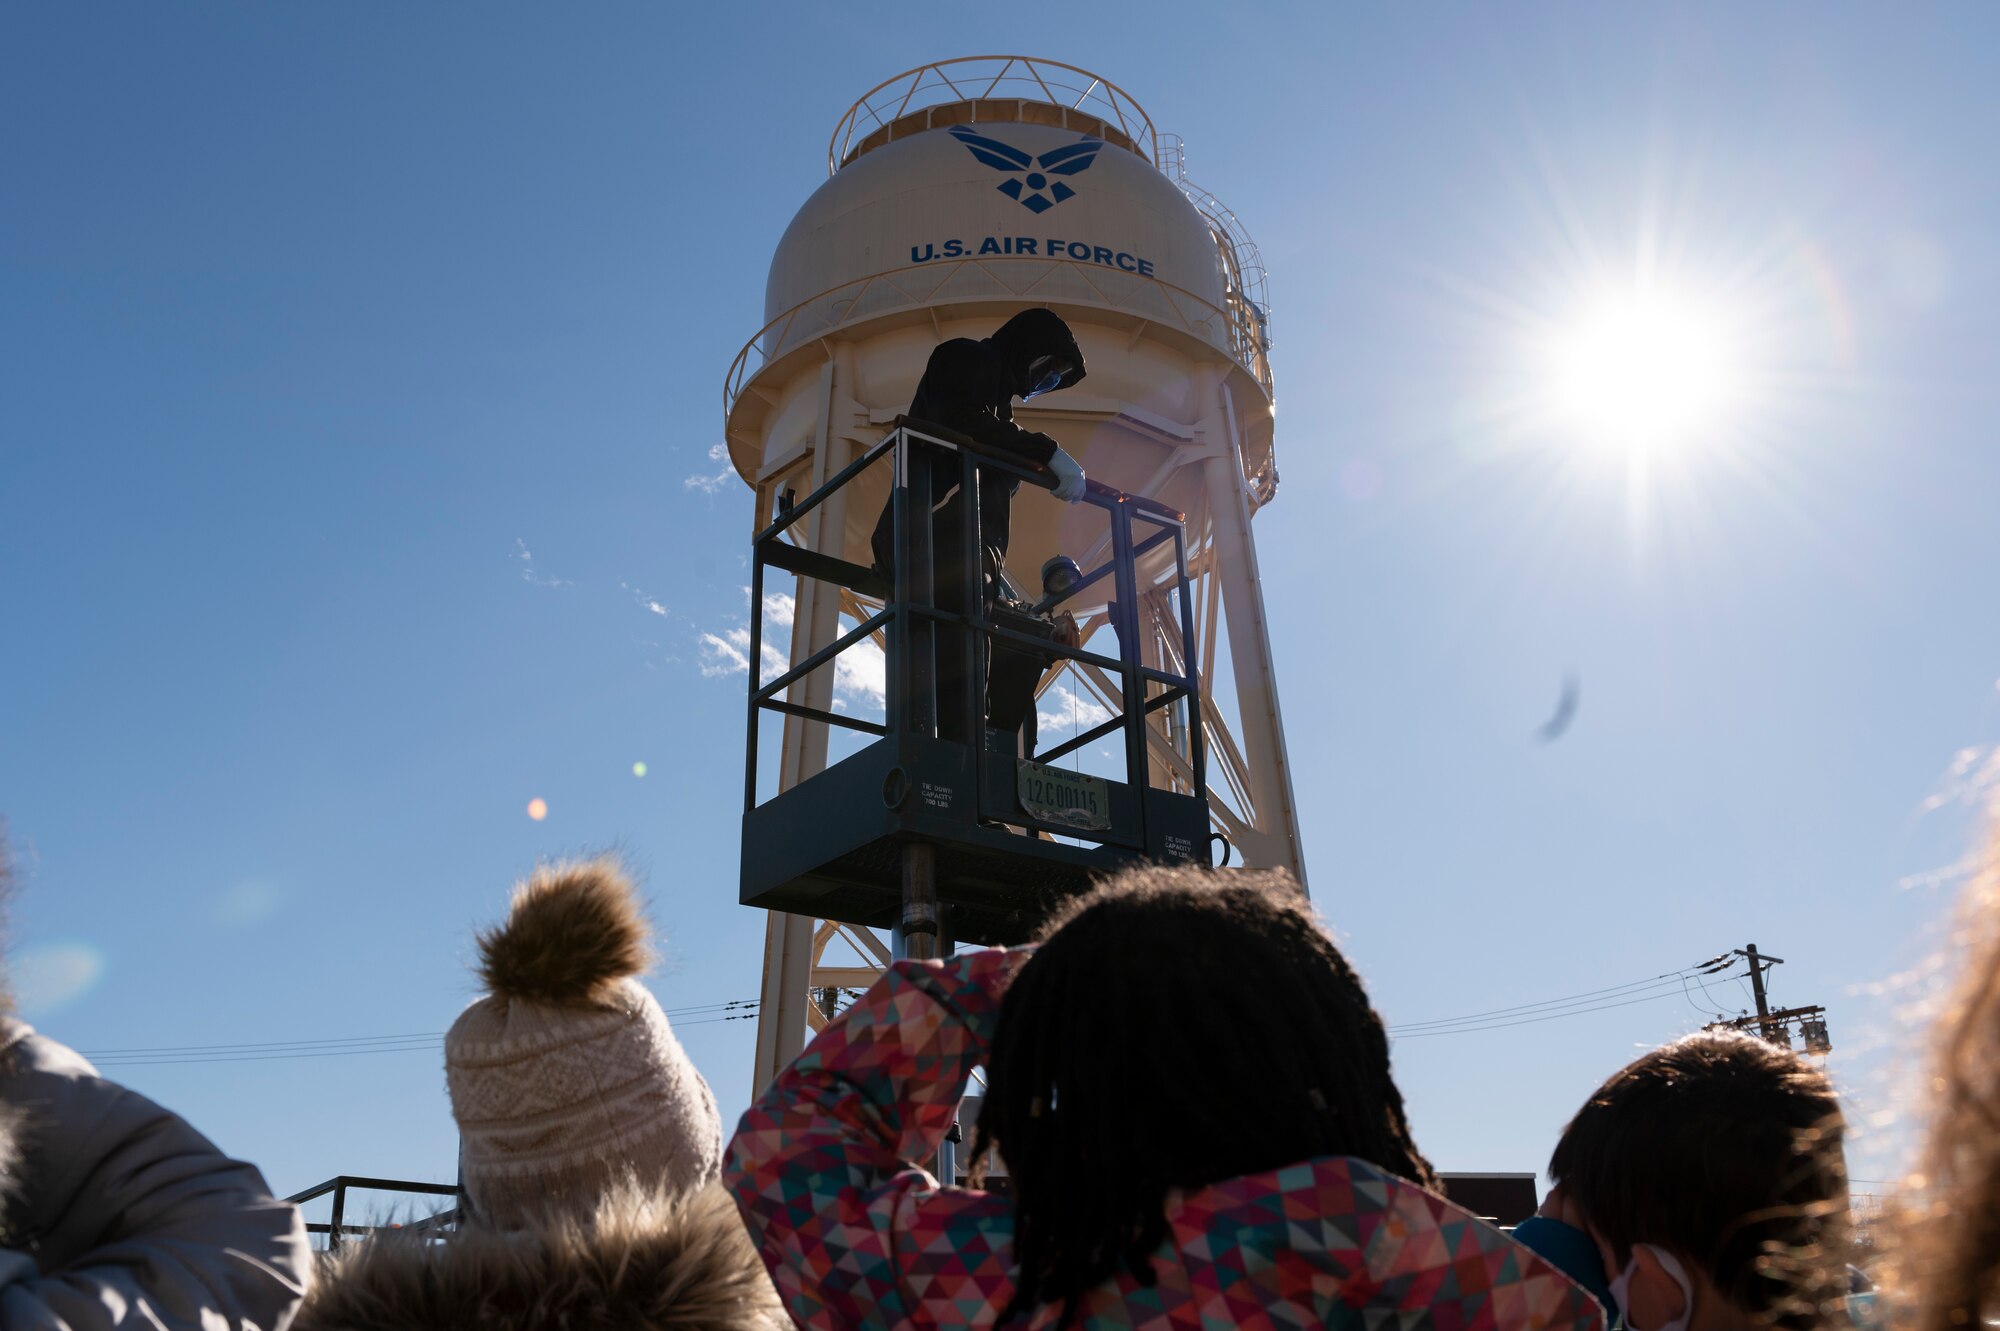 A tour guide stands on a lavatory truck lift in front of a water tower